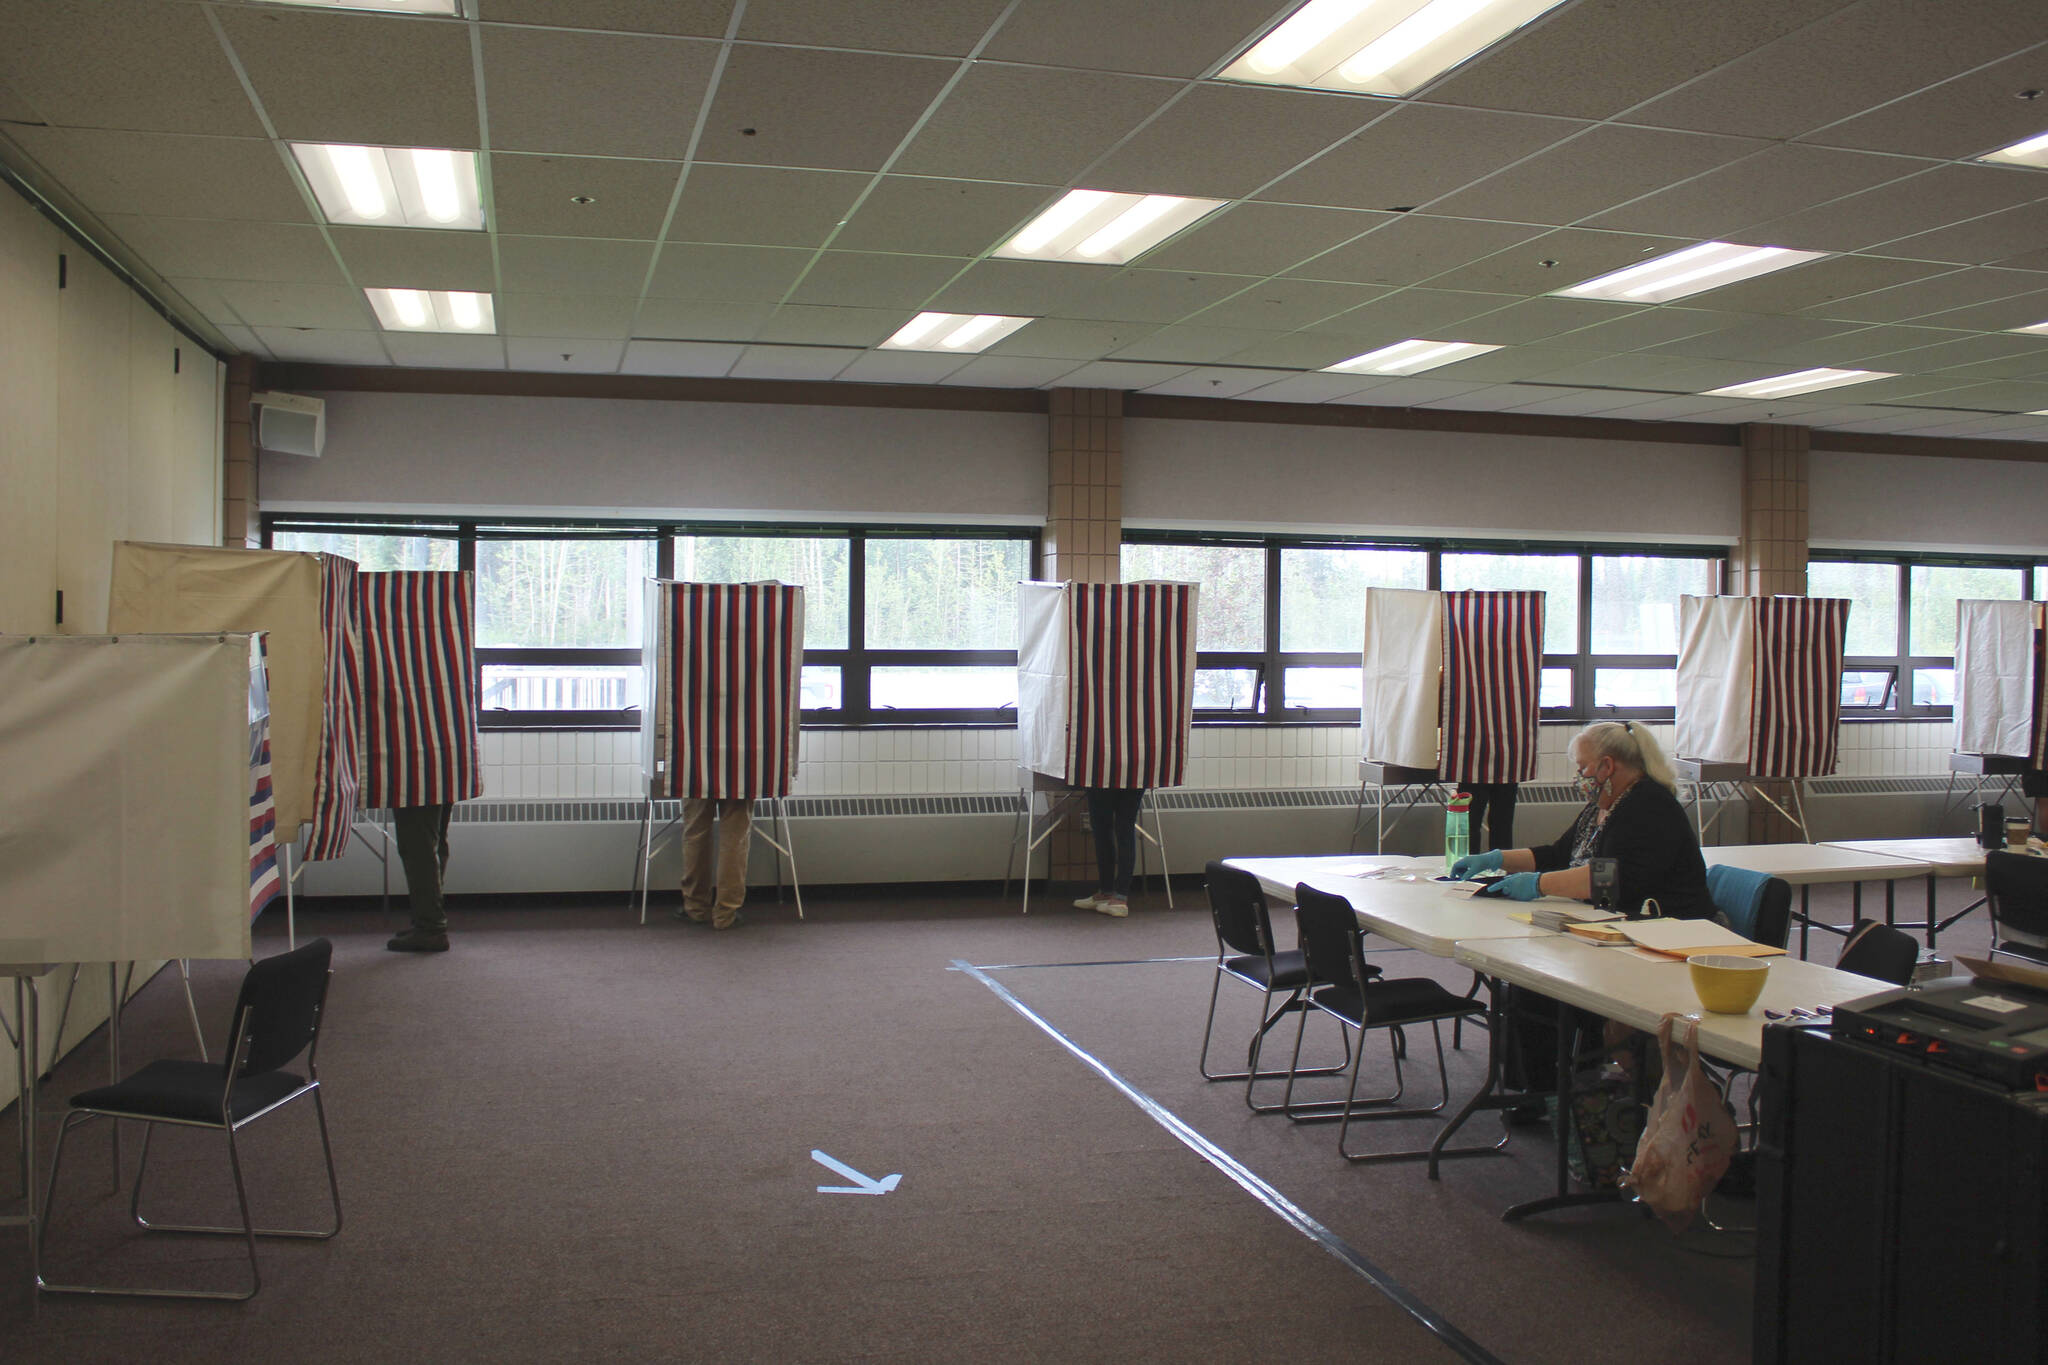 Voters cast ballots in Alaska’s special general and regular primary elections at the Soldotna Regional Sports Complex on Tuesday, Aug. 16, 2022 in Soldotna, Alaska. (Ashlyn O’Hara/Peninsula Clarion)